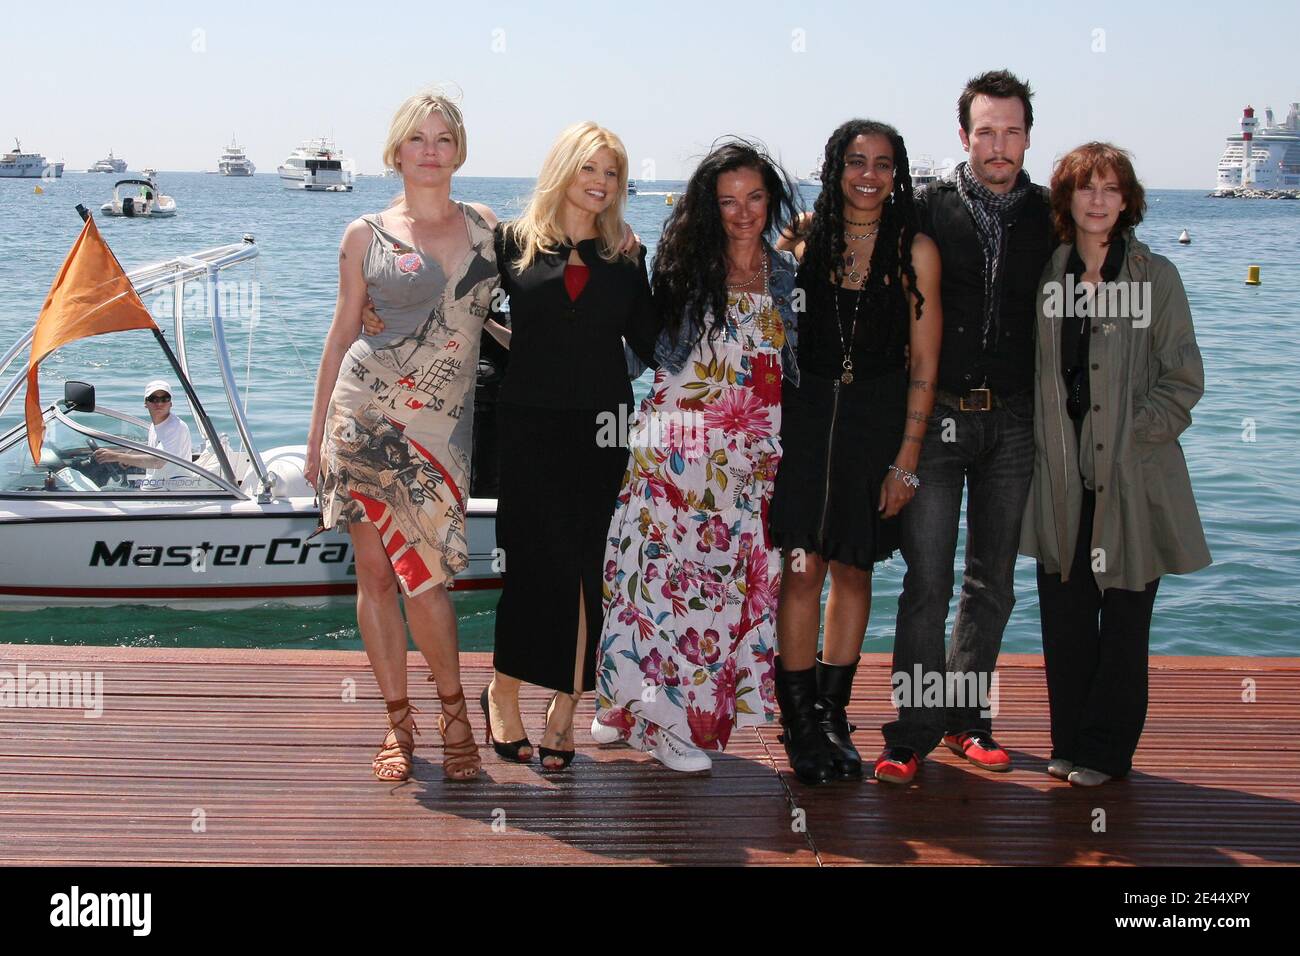 (L to R) Sara Stockbridge, Donna D'Errico, Mary McGuckian, Suzan-Lori Parks, Michael Eklund and Amanda Plummer pose for a photocall for 'The making of plus one' held at Majestic beach hotel during the 62nd Cannes Film Festival at Martinez hotel in Cannes, France on May 16, 2009. Photo by Guignebourg-Gorassini/ABACAPRESS.COM Stock Photo